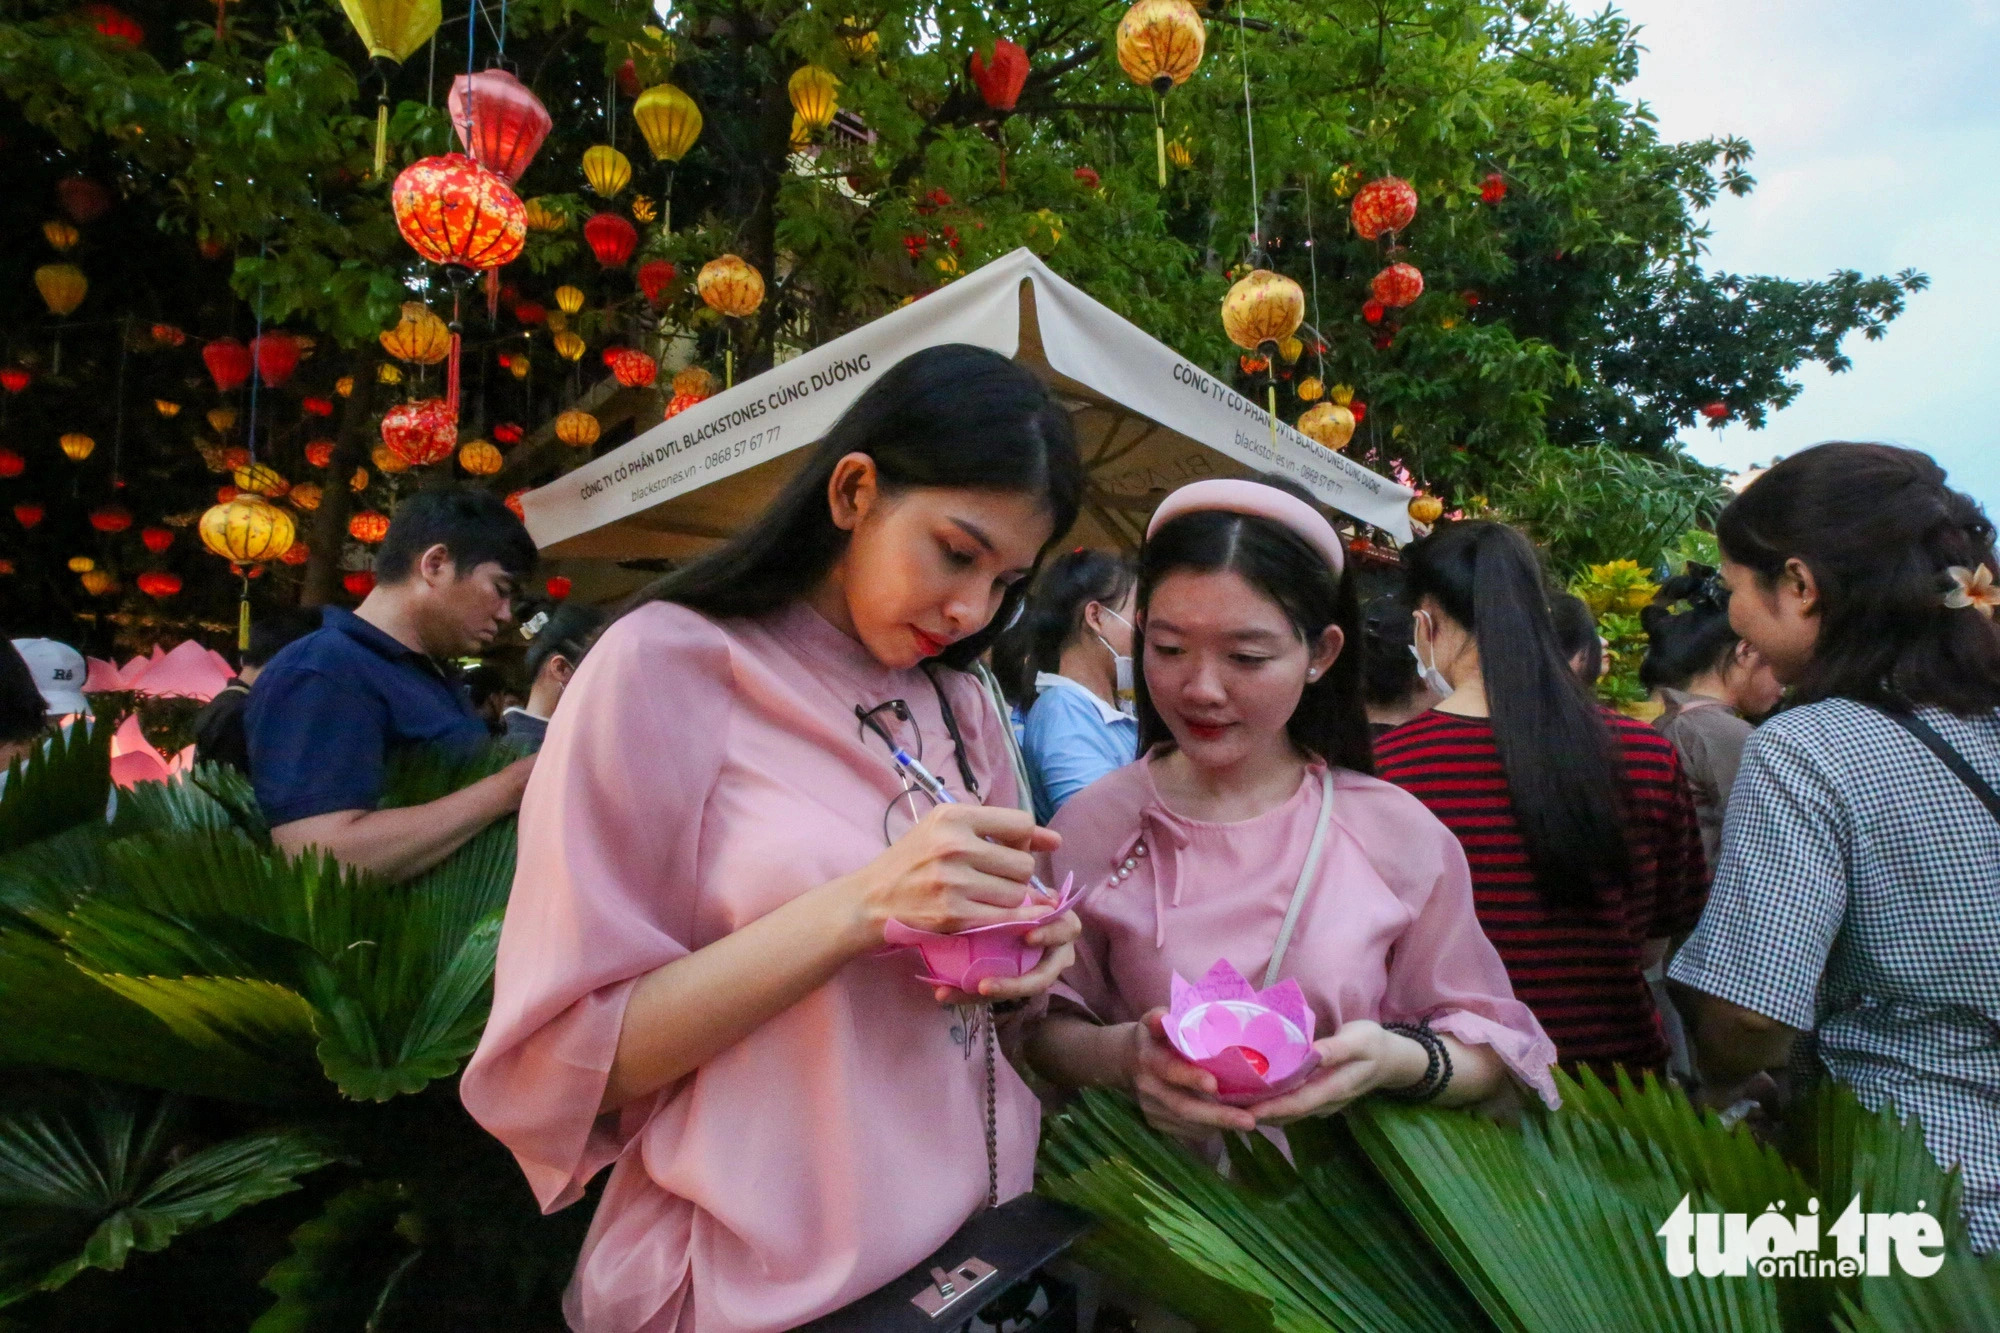 Anh Thu (L) and her friend from District 10, Ho Chi Minh City come to the Phap Hoa Pagoda area early to find a perfect spot for releasing water lanterns. Photo: Phuong Quyen / Tuoi Tre